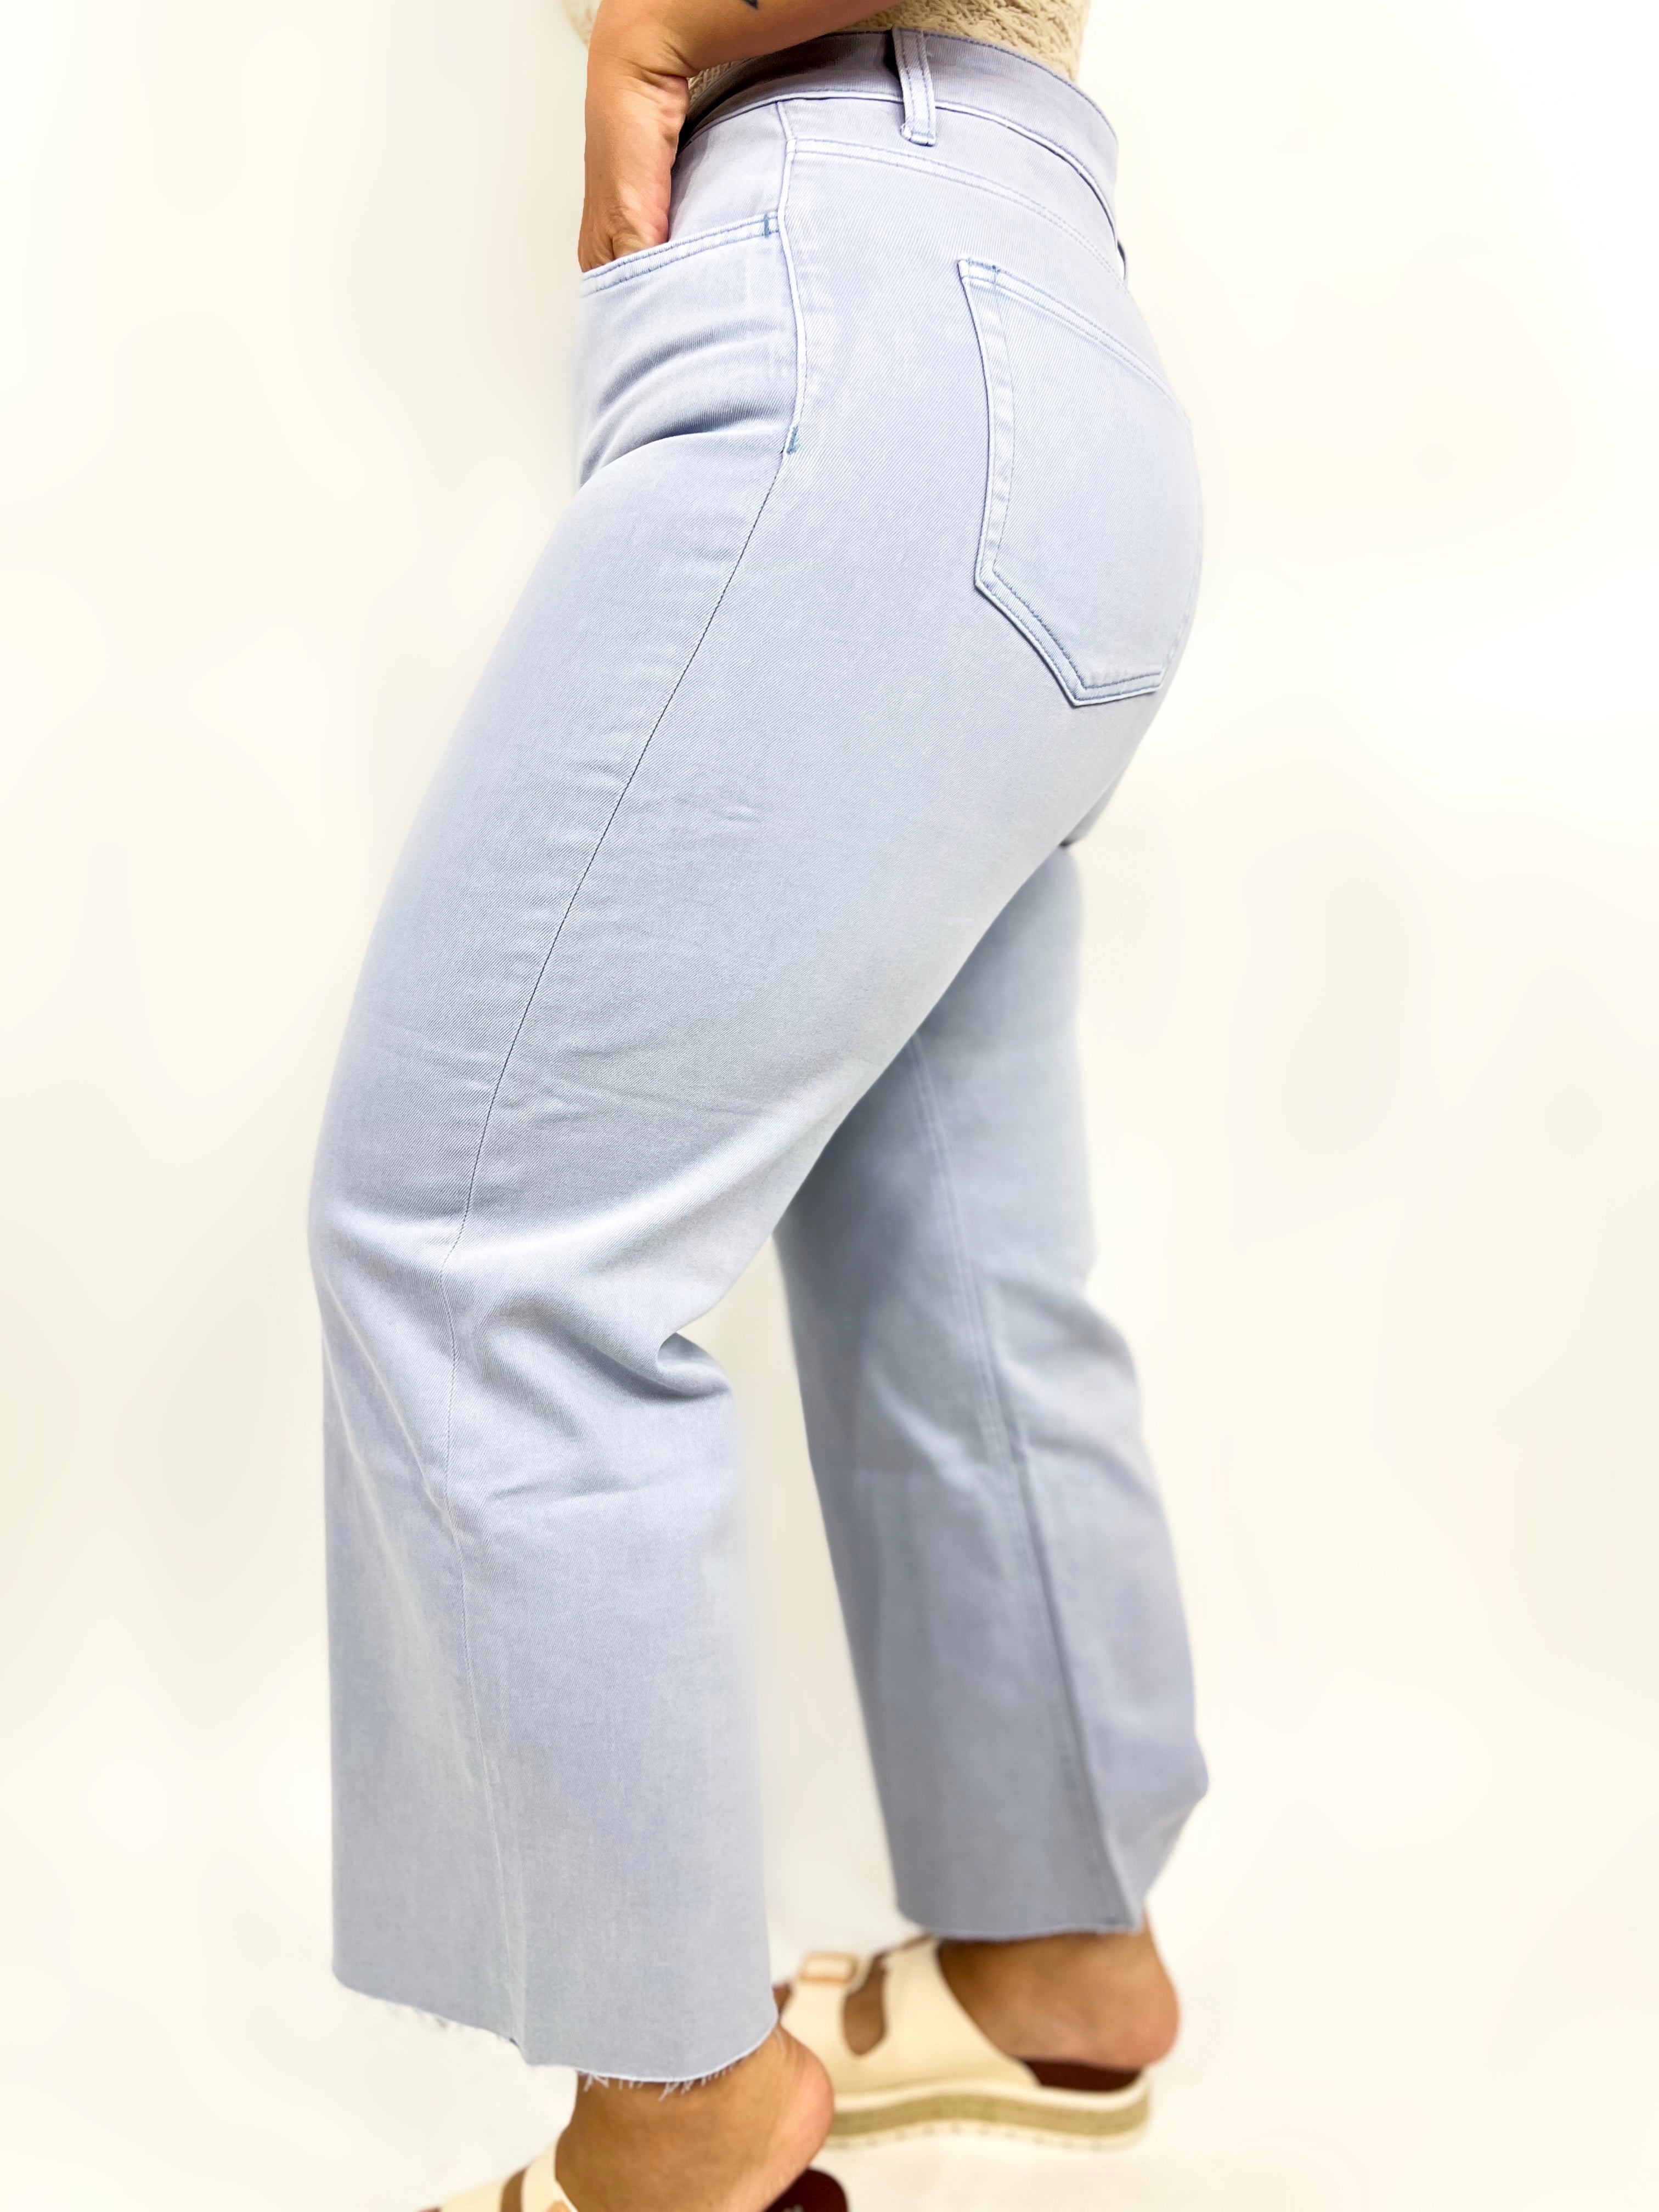 Grey Dawn Wide Leg Jeans-190 Jeans-Vervet-Heathered Boho Boutique, Women's Fashion and Accessories in Palmetto, FL